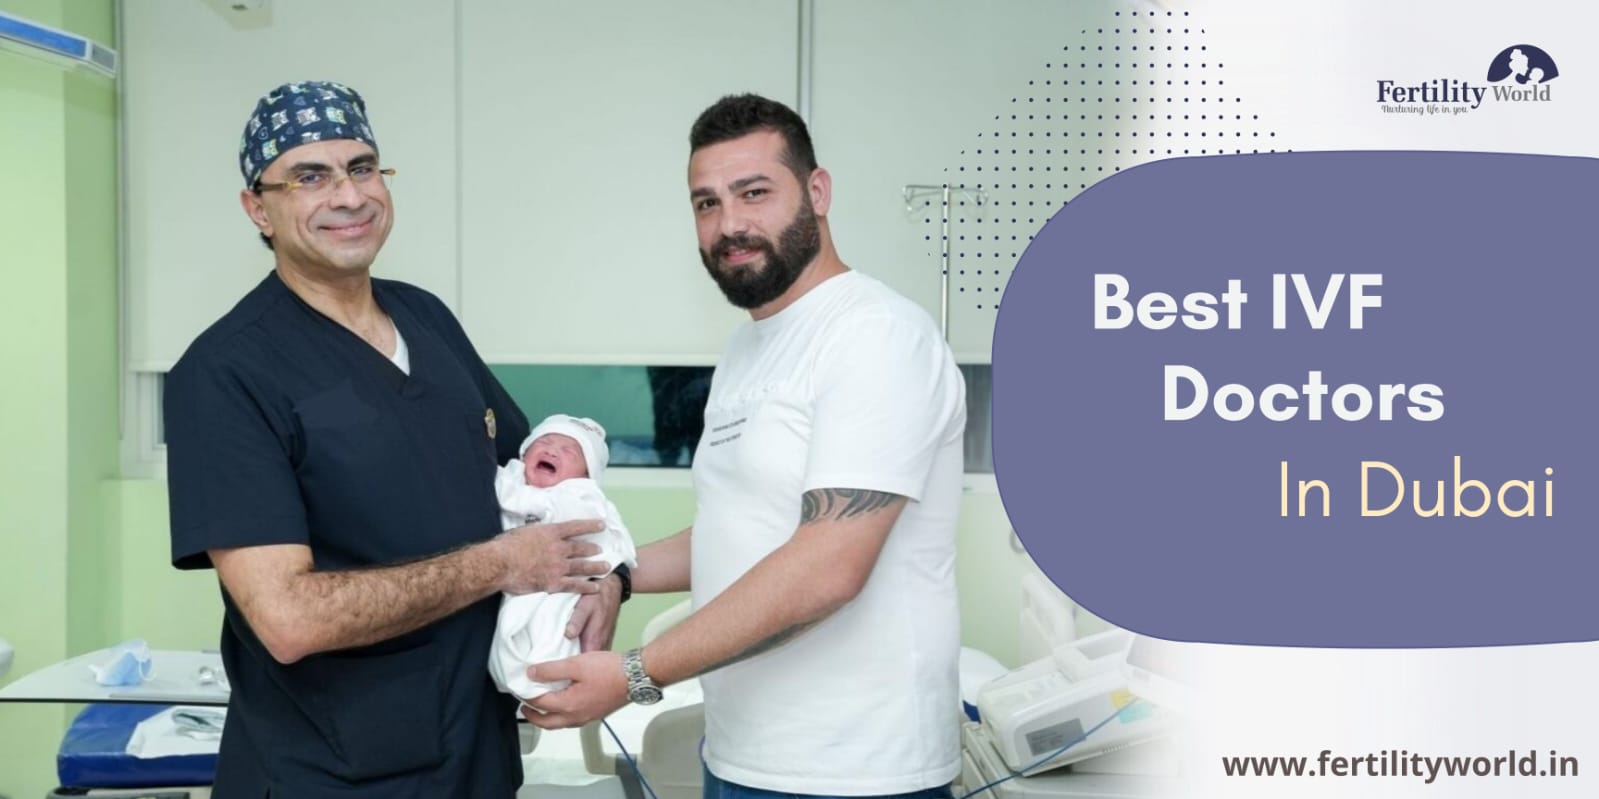 Who are the best IVF Doctors in Dubai?